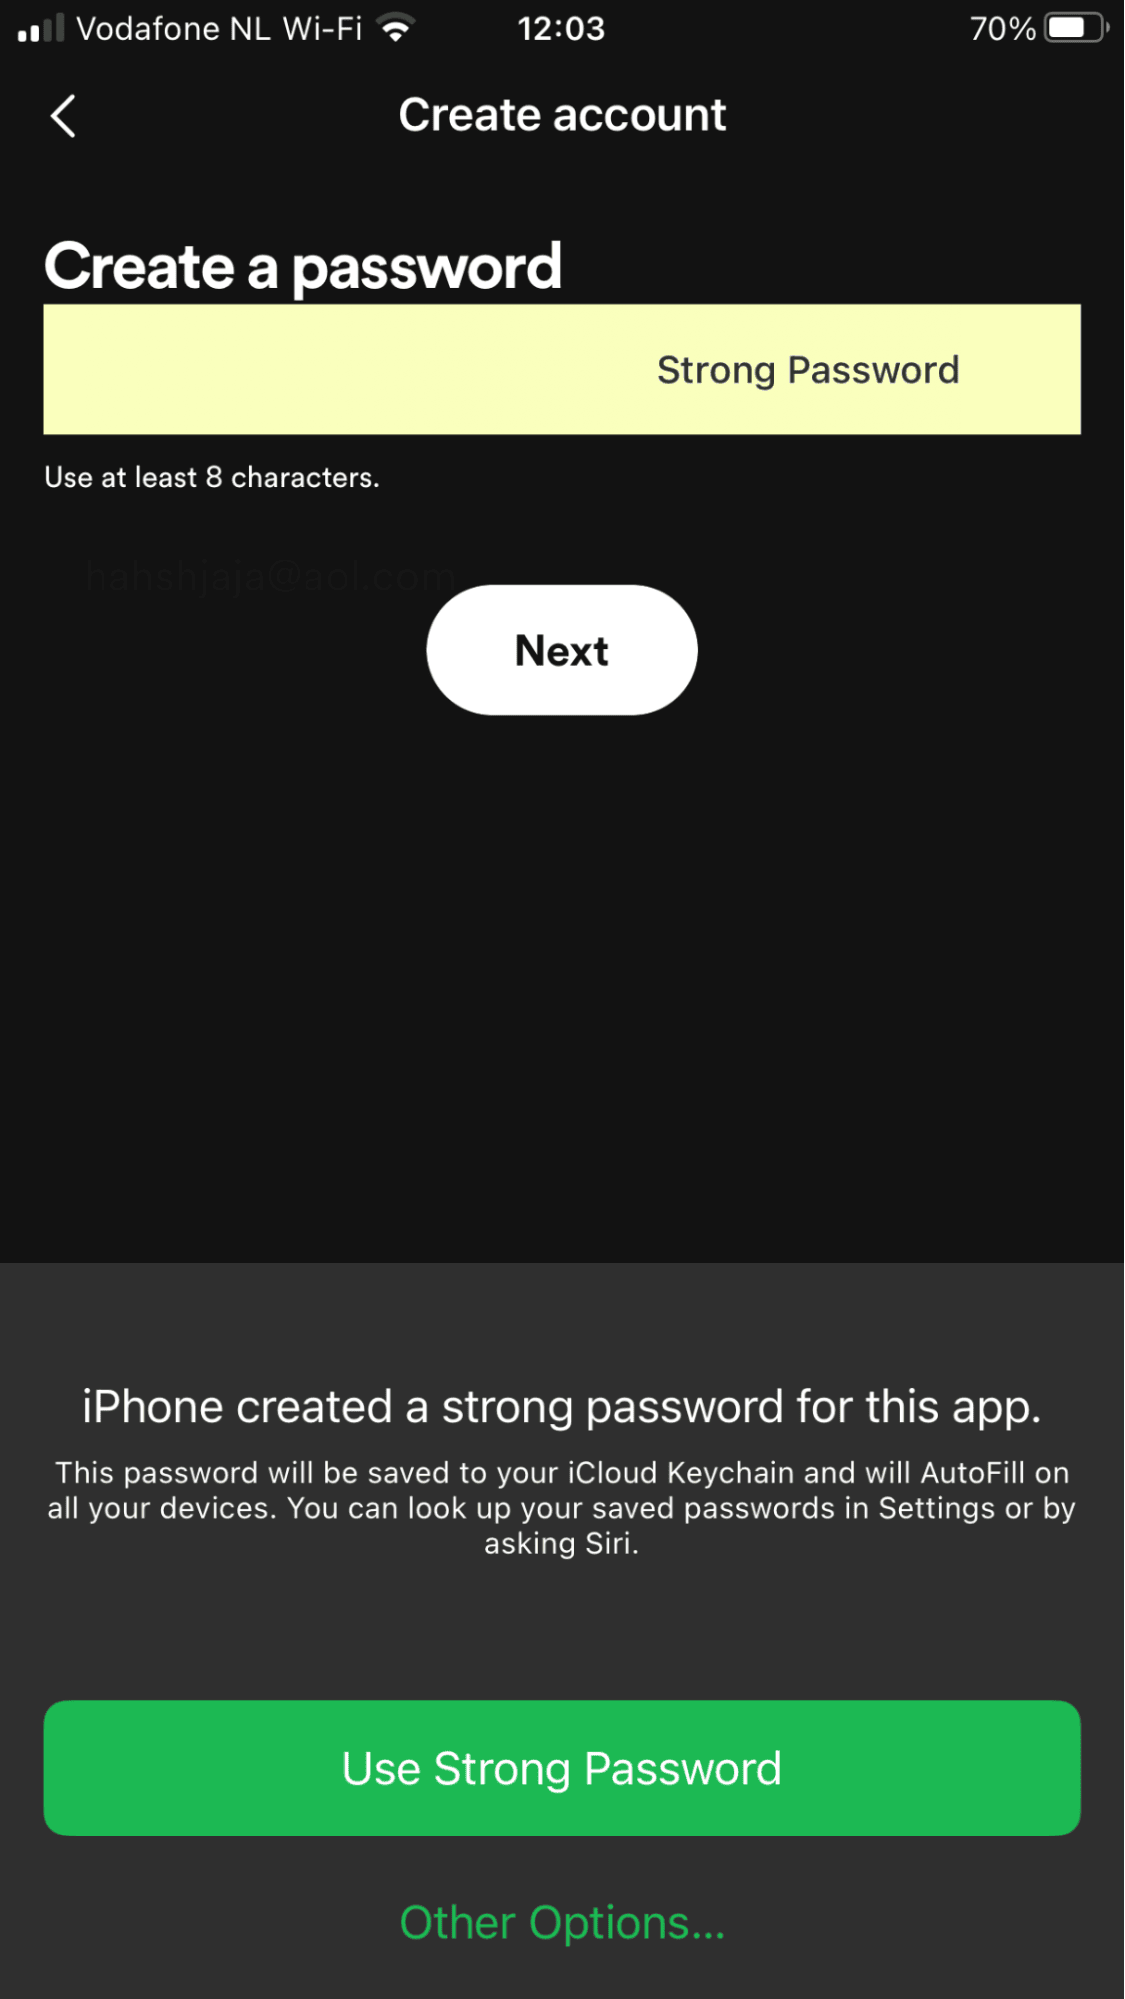 How to use suggest password on iPhone